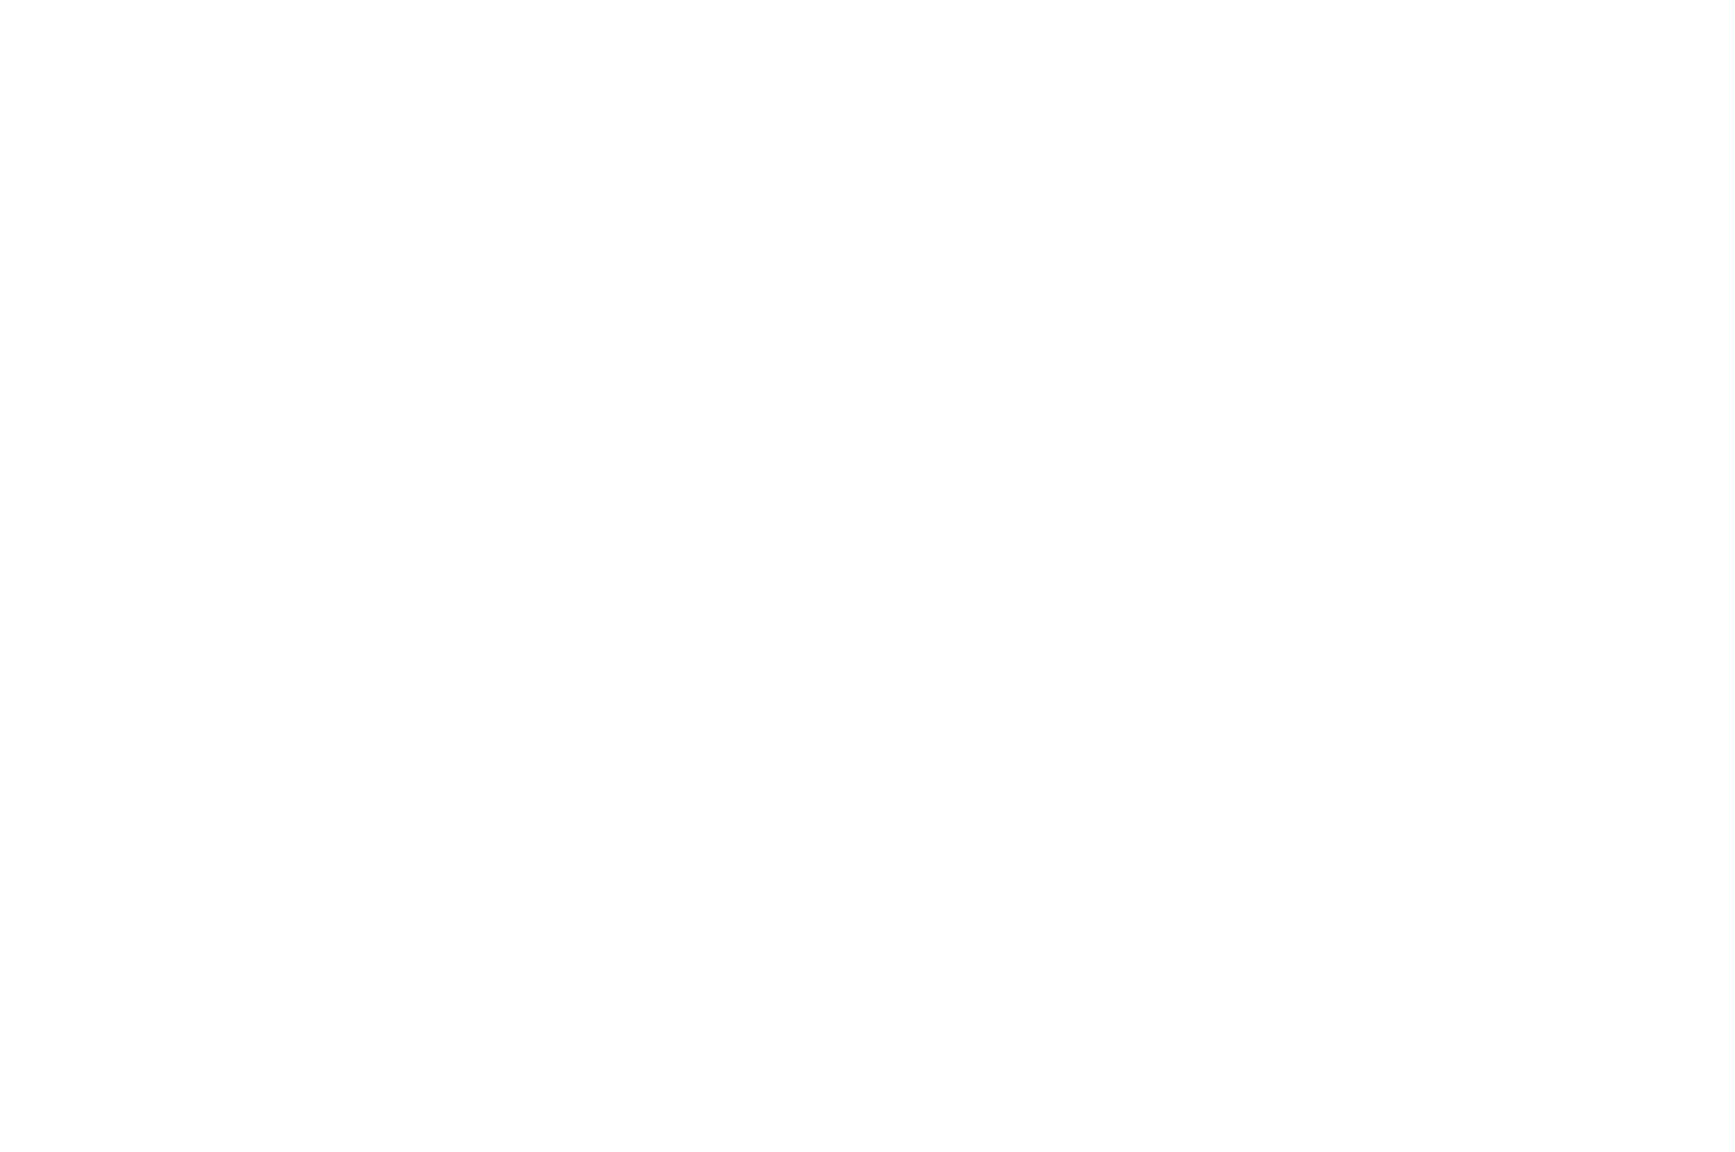 OFFICIAL SELECTION - Blow-Up International Arthouse Filmfest Chicago - 2020 (1).png